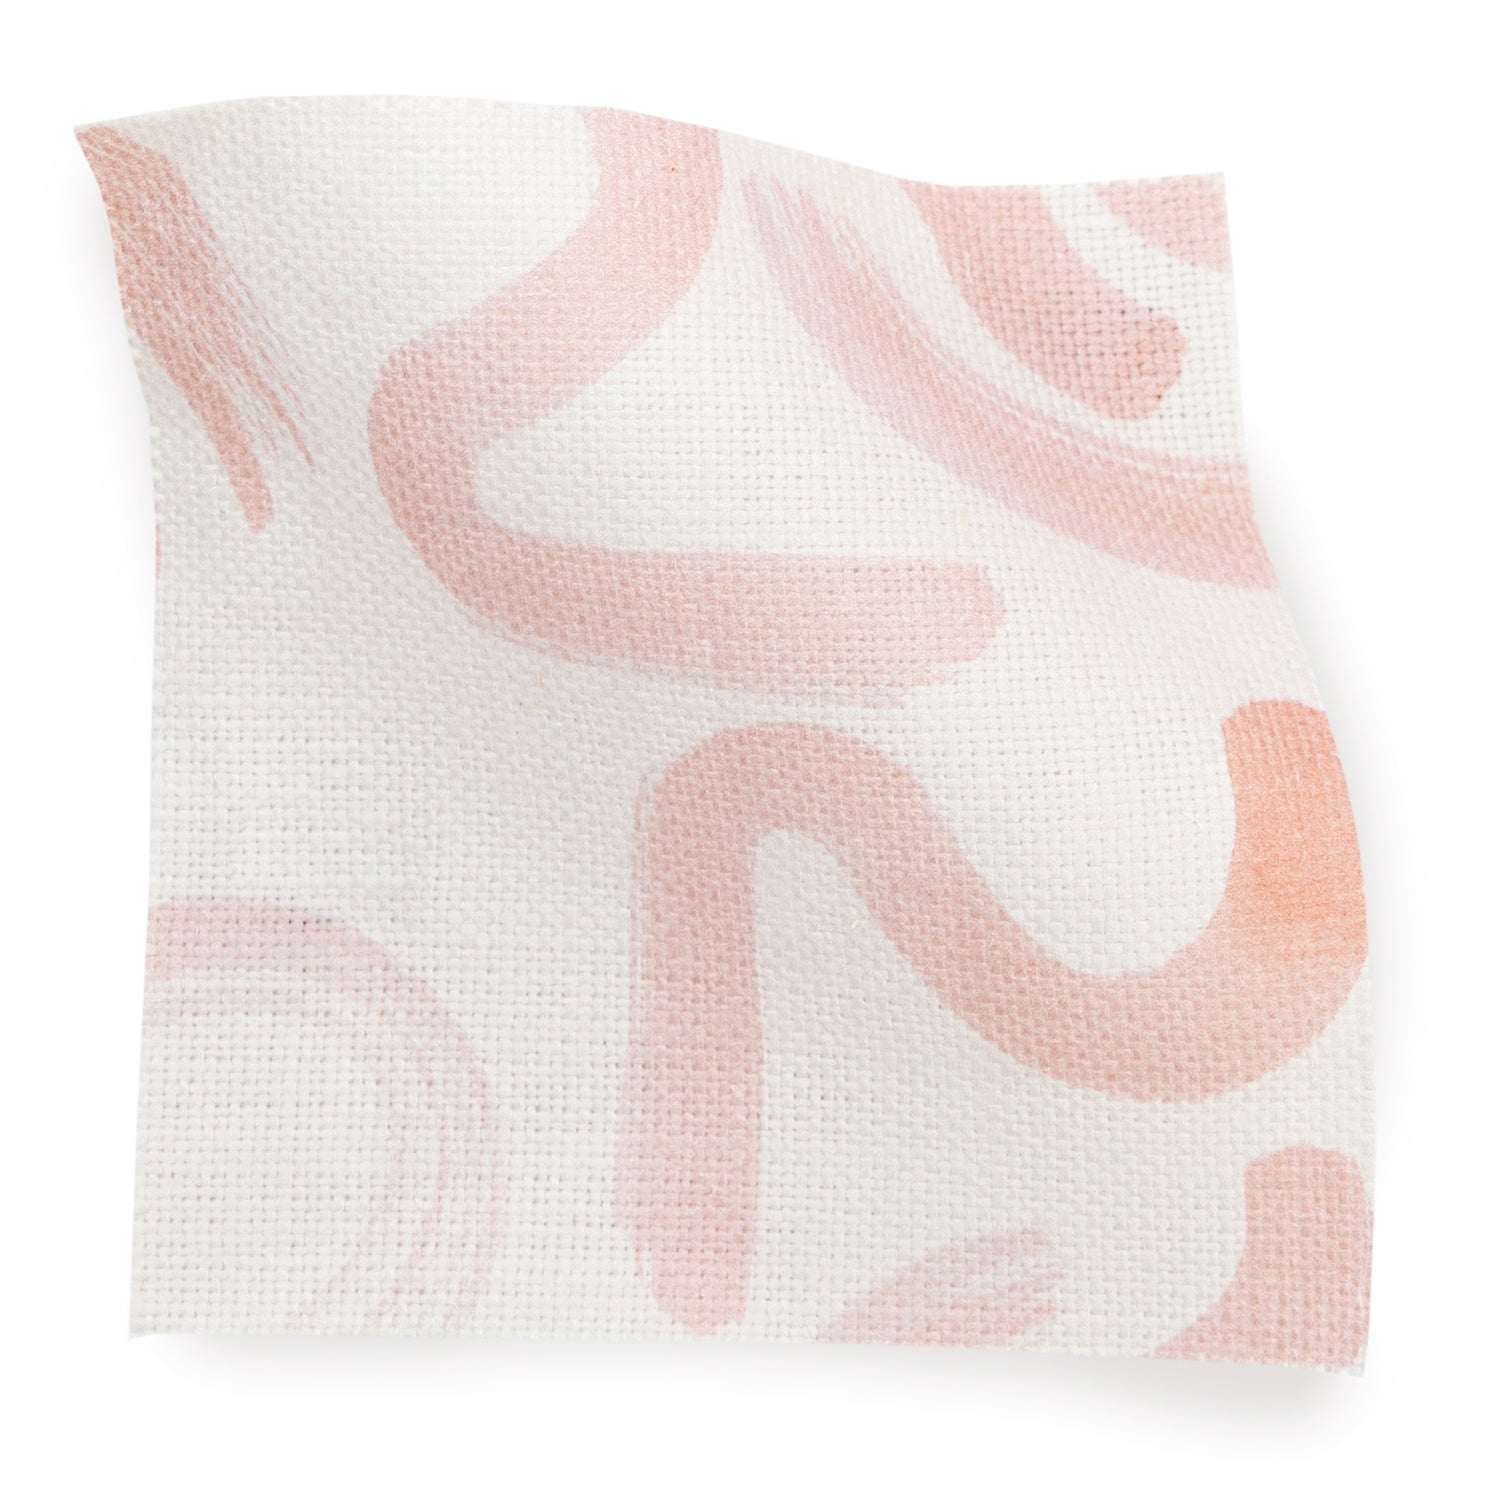 Pink Graphic Printed Linen Swatch